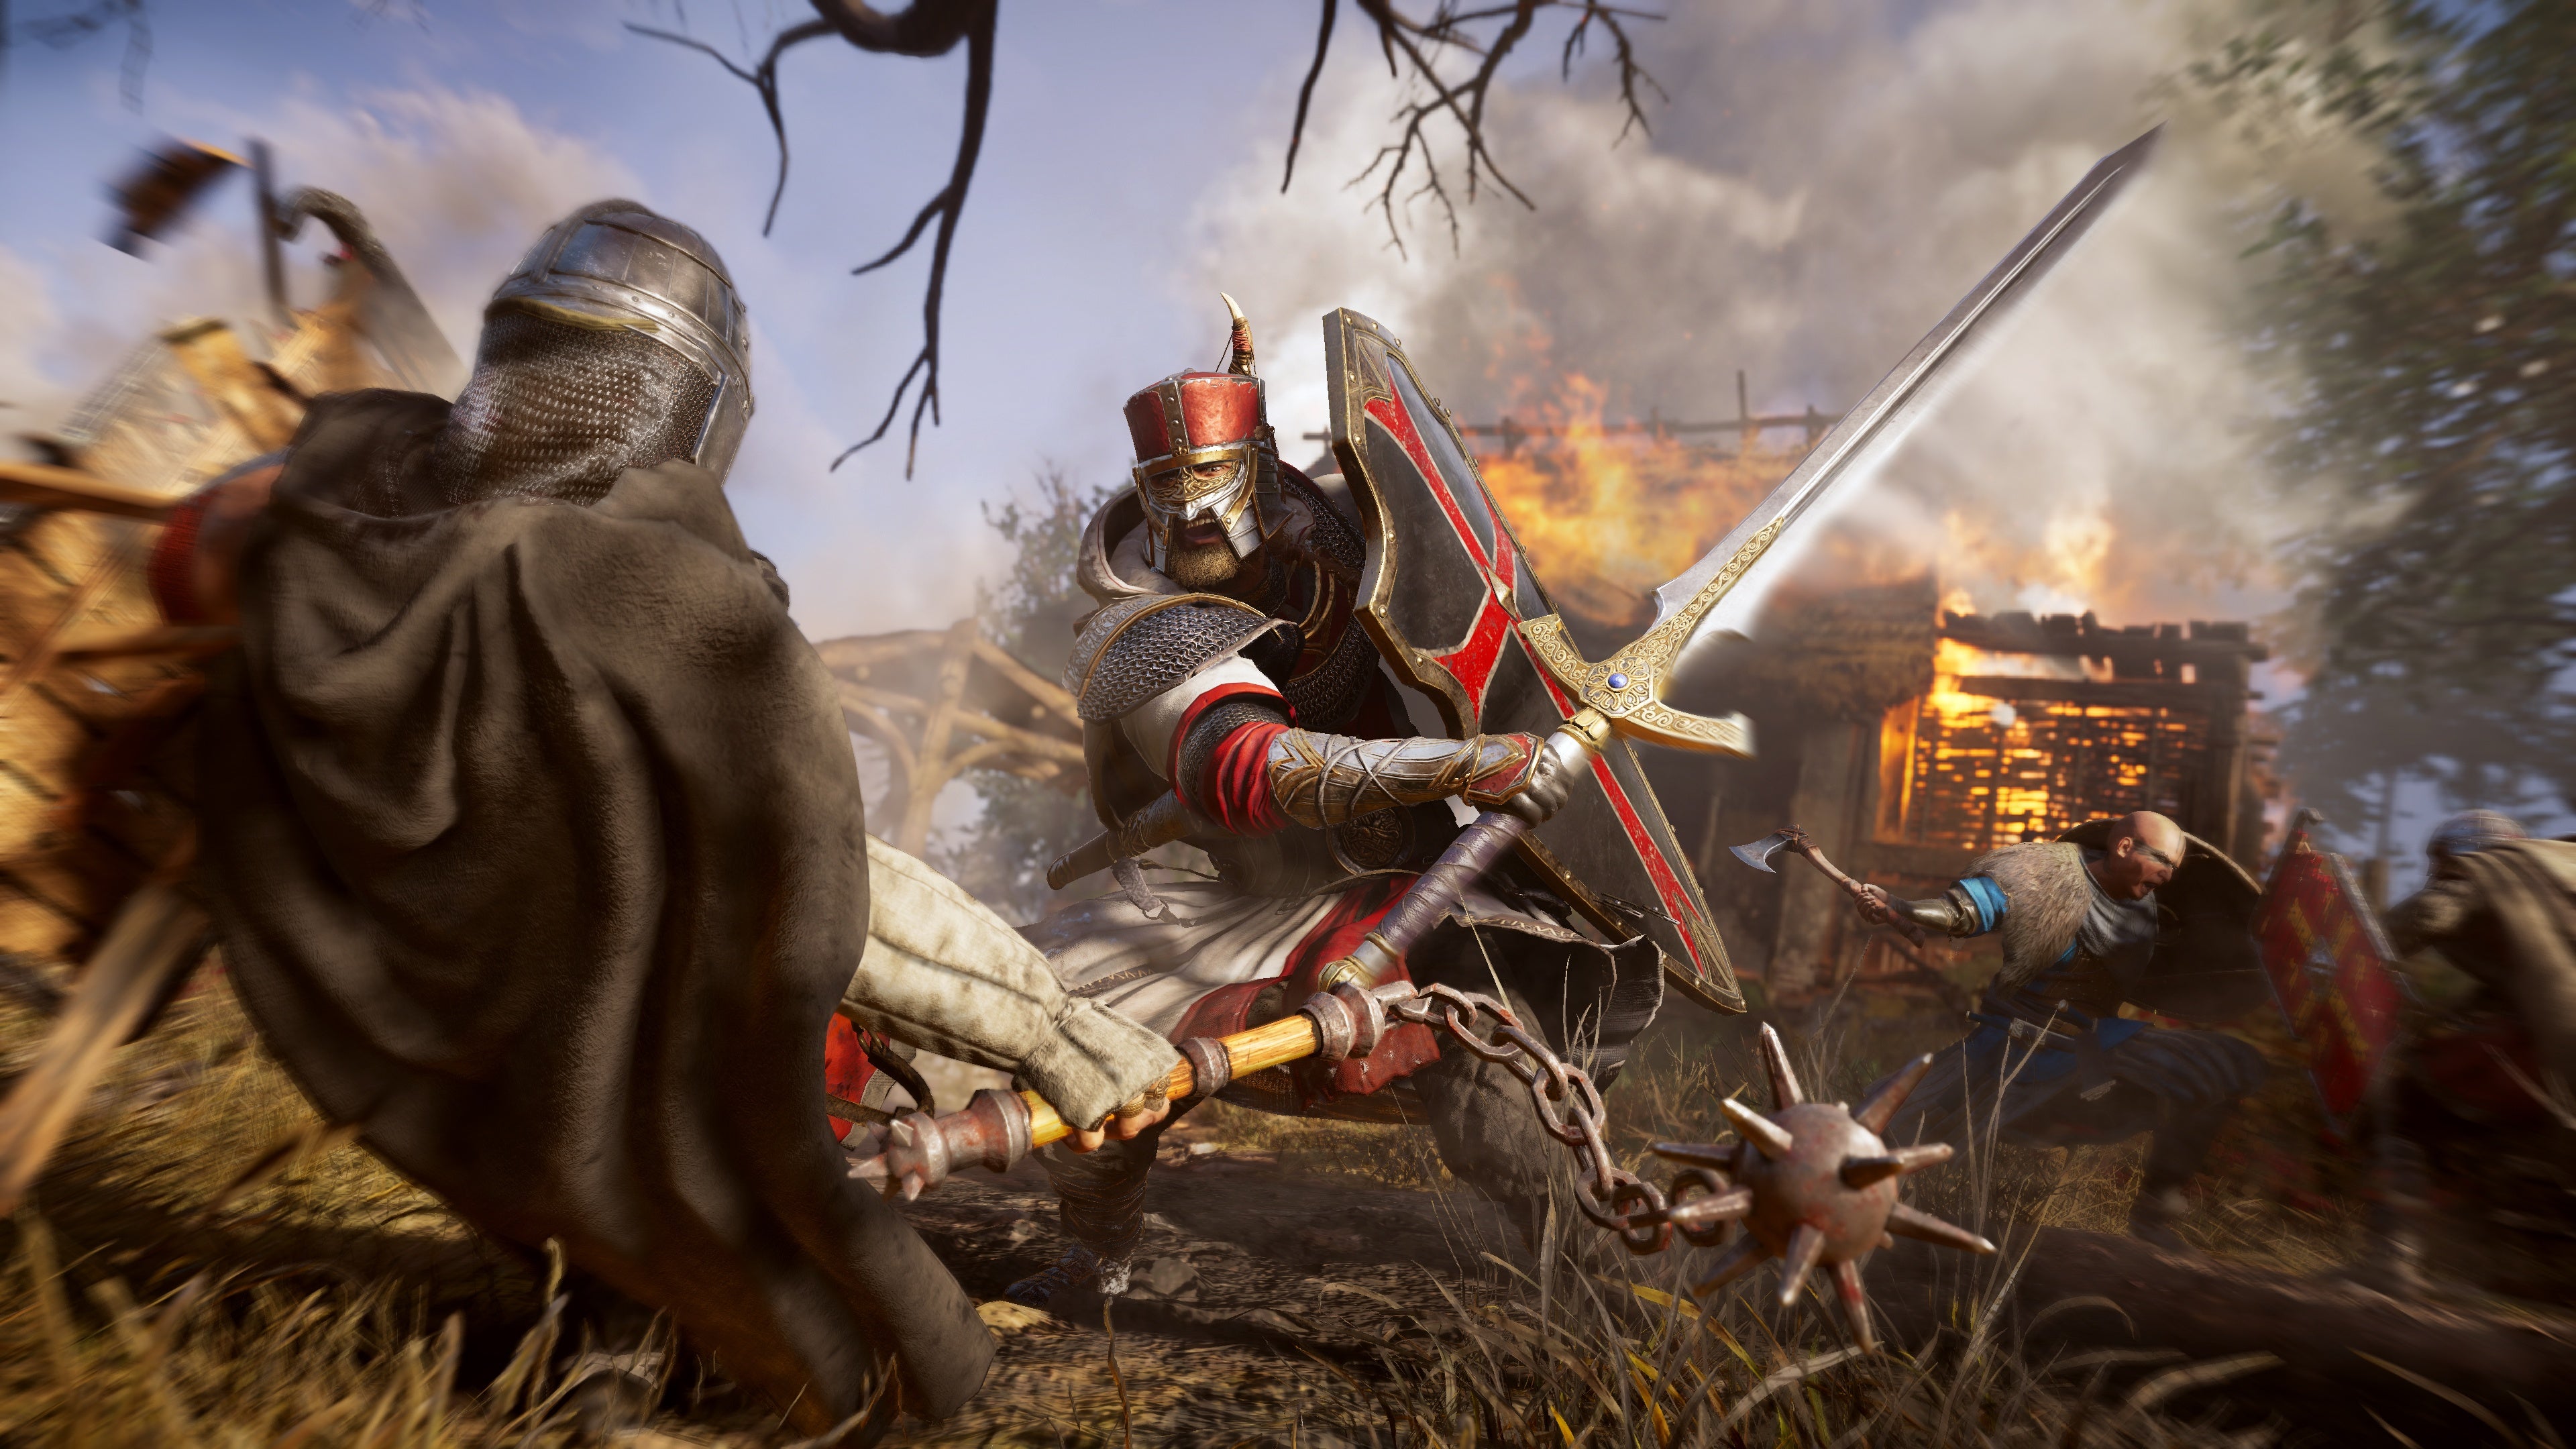 A screenshot of some angry men fighting with swords in Assassin's Creed Valhalla's new River Raid mode.